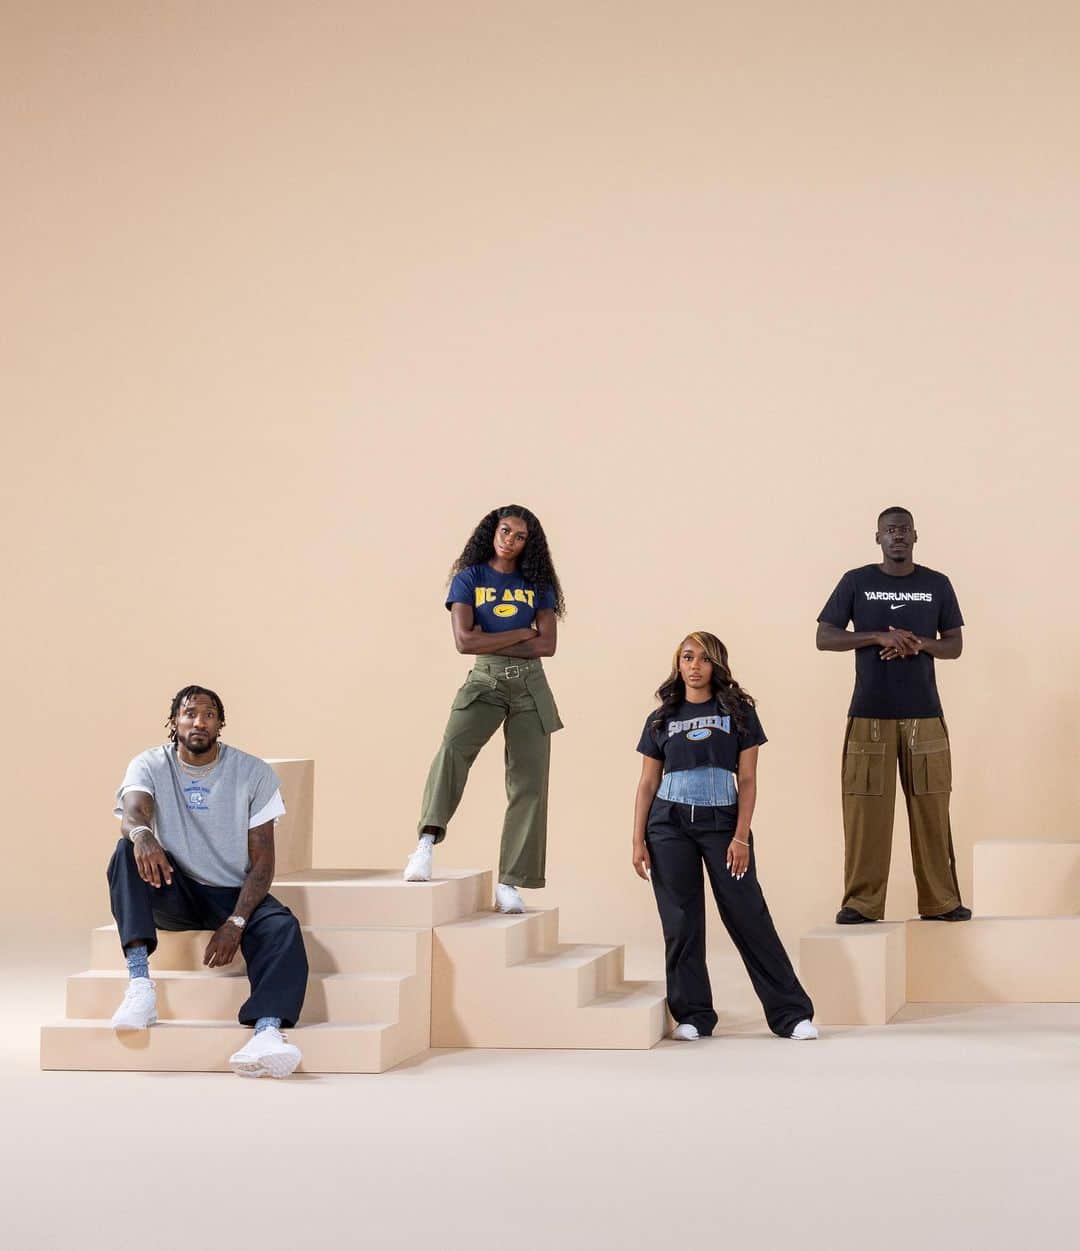 NIKEのインスタグラム：「They’reeee  Baaaack.   Introducing Yardrunner’s 4.0.  For the 4th year, we’re honored to present the Nike Yardrunner’s: electric changemakers from HBCU’s across the country — Howard University (@howard1867), Tennessee State University (@tennstateu), Prairie View A&M (@pvamu), Florida A&M (@famu_1887), Southern University (@southernu_br), Winston Salem State University (@wssu1892), North Carolina A&T (@ncatsuaggies), Hampton University (@_hamptonu) and Bowie State University (@bowiestateuniversity)  – boldly honoring their school’s rich legacies as agents of inspiration and change.   Learn their stories. Peep the exclusive Yardrunner’s inspired HBCU merch, and most importantly – get inspired. All exclusively available in the NIKE app.」